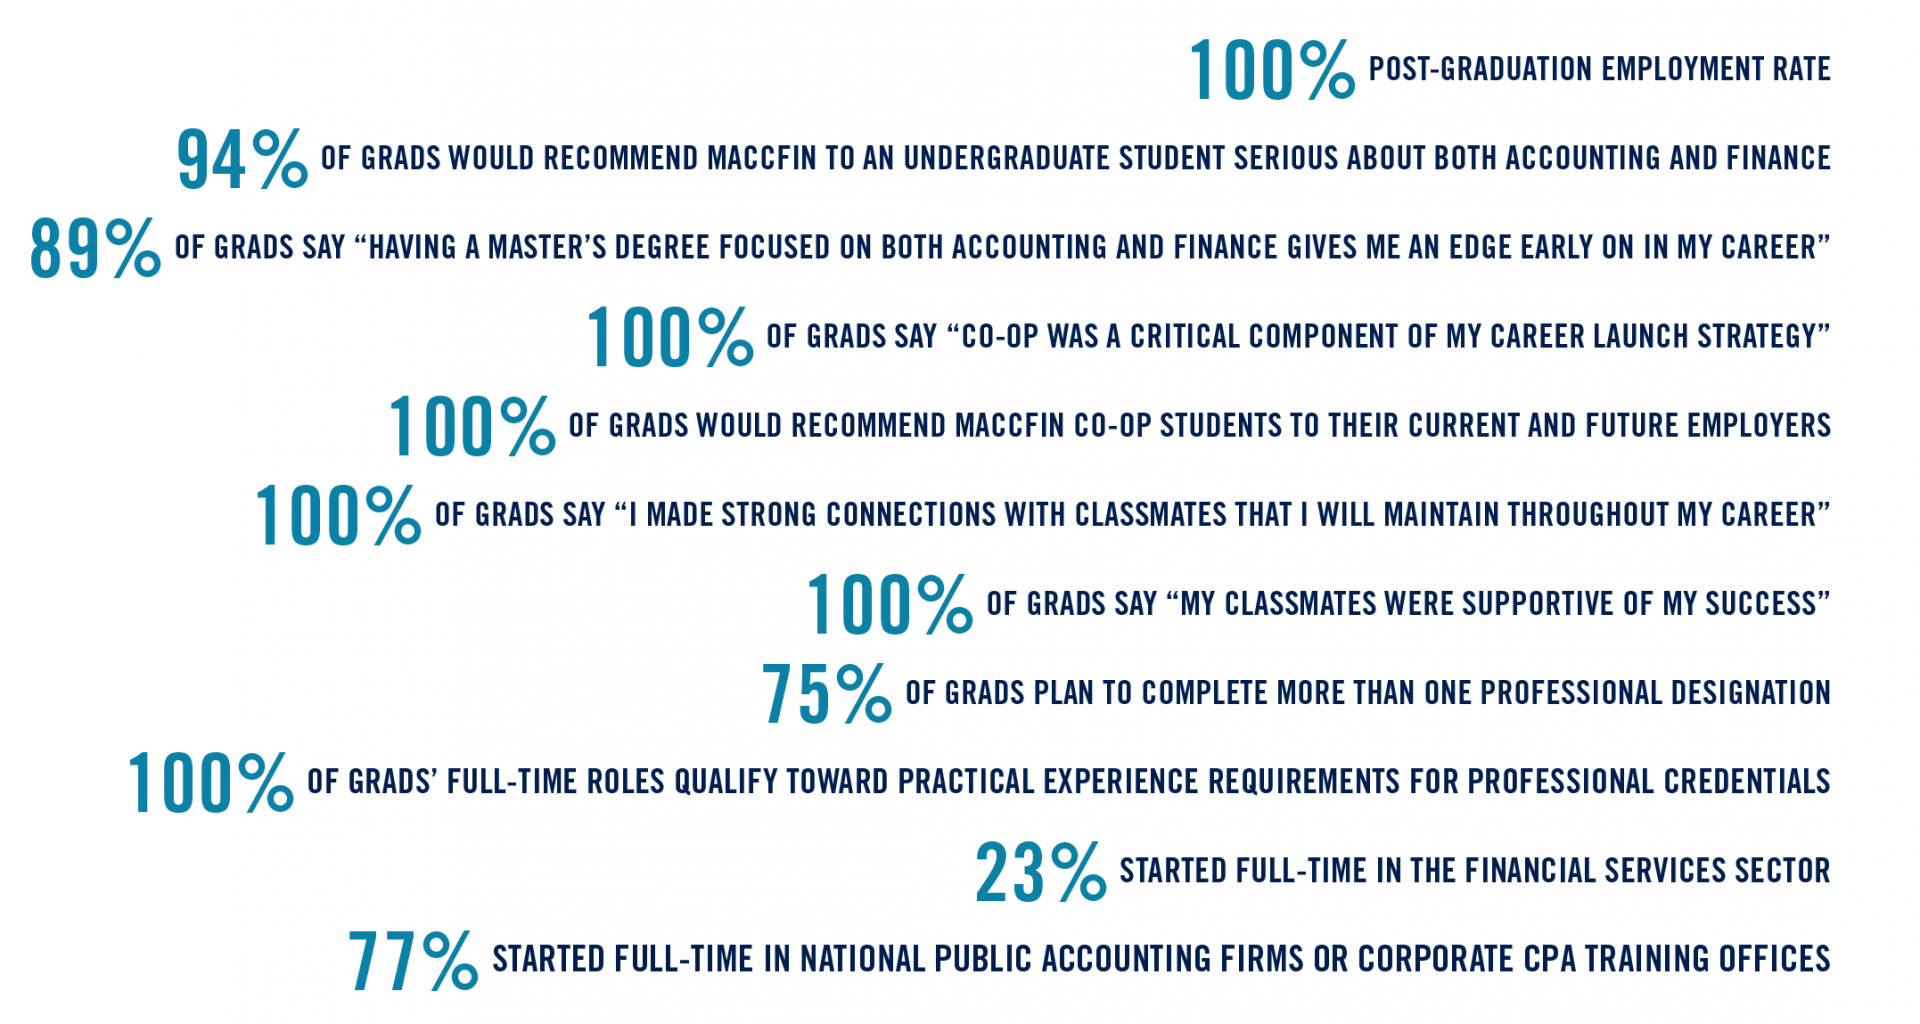 100% Post-graduation employment rate  94% of grads would recommend MAccFin to an undergraduate student serious about both accounting and finance  89%	of grads say "Having a Master's degree focused on both accounting and finance gives me an edge early on in my career"  100%	of grads say "Co-op was a critical component of my career launch strategy"  100%	of grads would recommend MAccFin co-op students to their current and future employers  100%	of grads say "I made strong connections with classmates that I will maintain throughout my career"  100%	of grads say "My classmate were supportive of my success"  75%	of grads plan to complete more than one professional designation  100%	of grads' full-time roles qualify toward practical experience requirements for professional credentials  23%	started full-time in the financial services sector  77%	started full-time in national public accounting firms or corporate CPA training offices